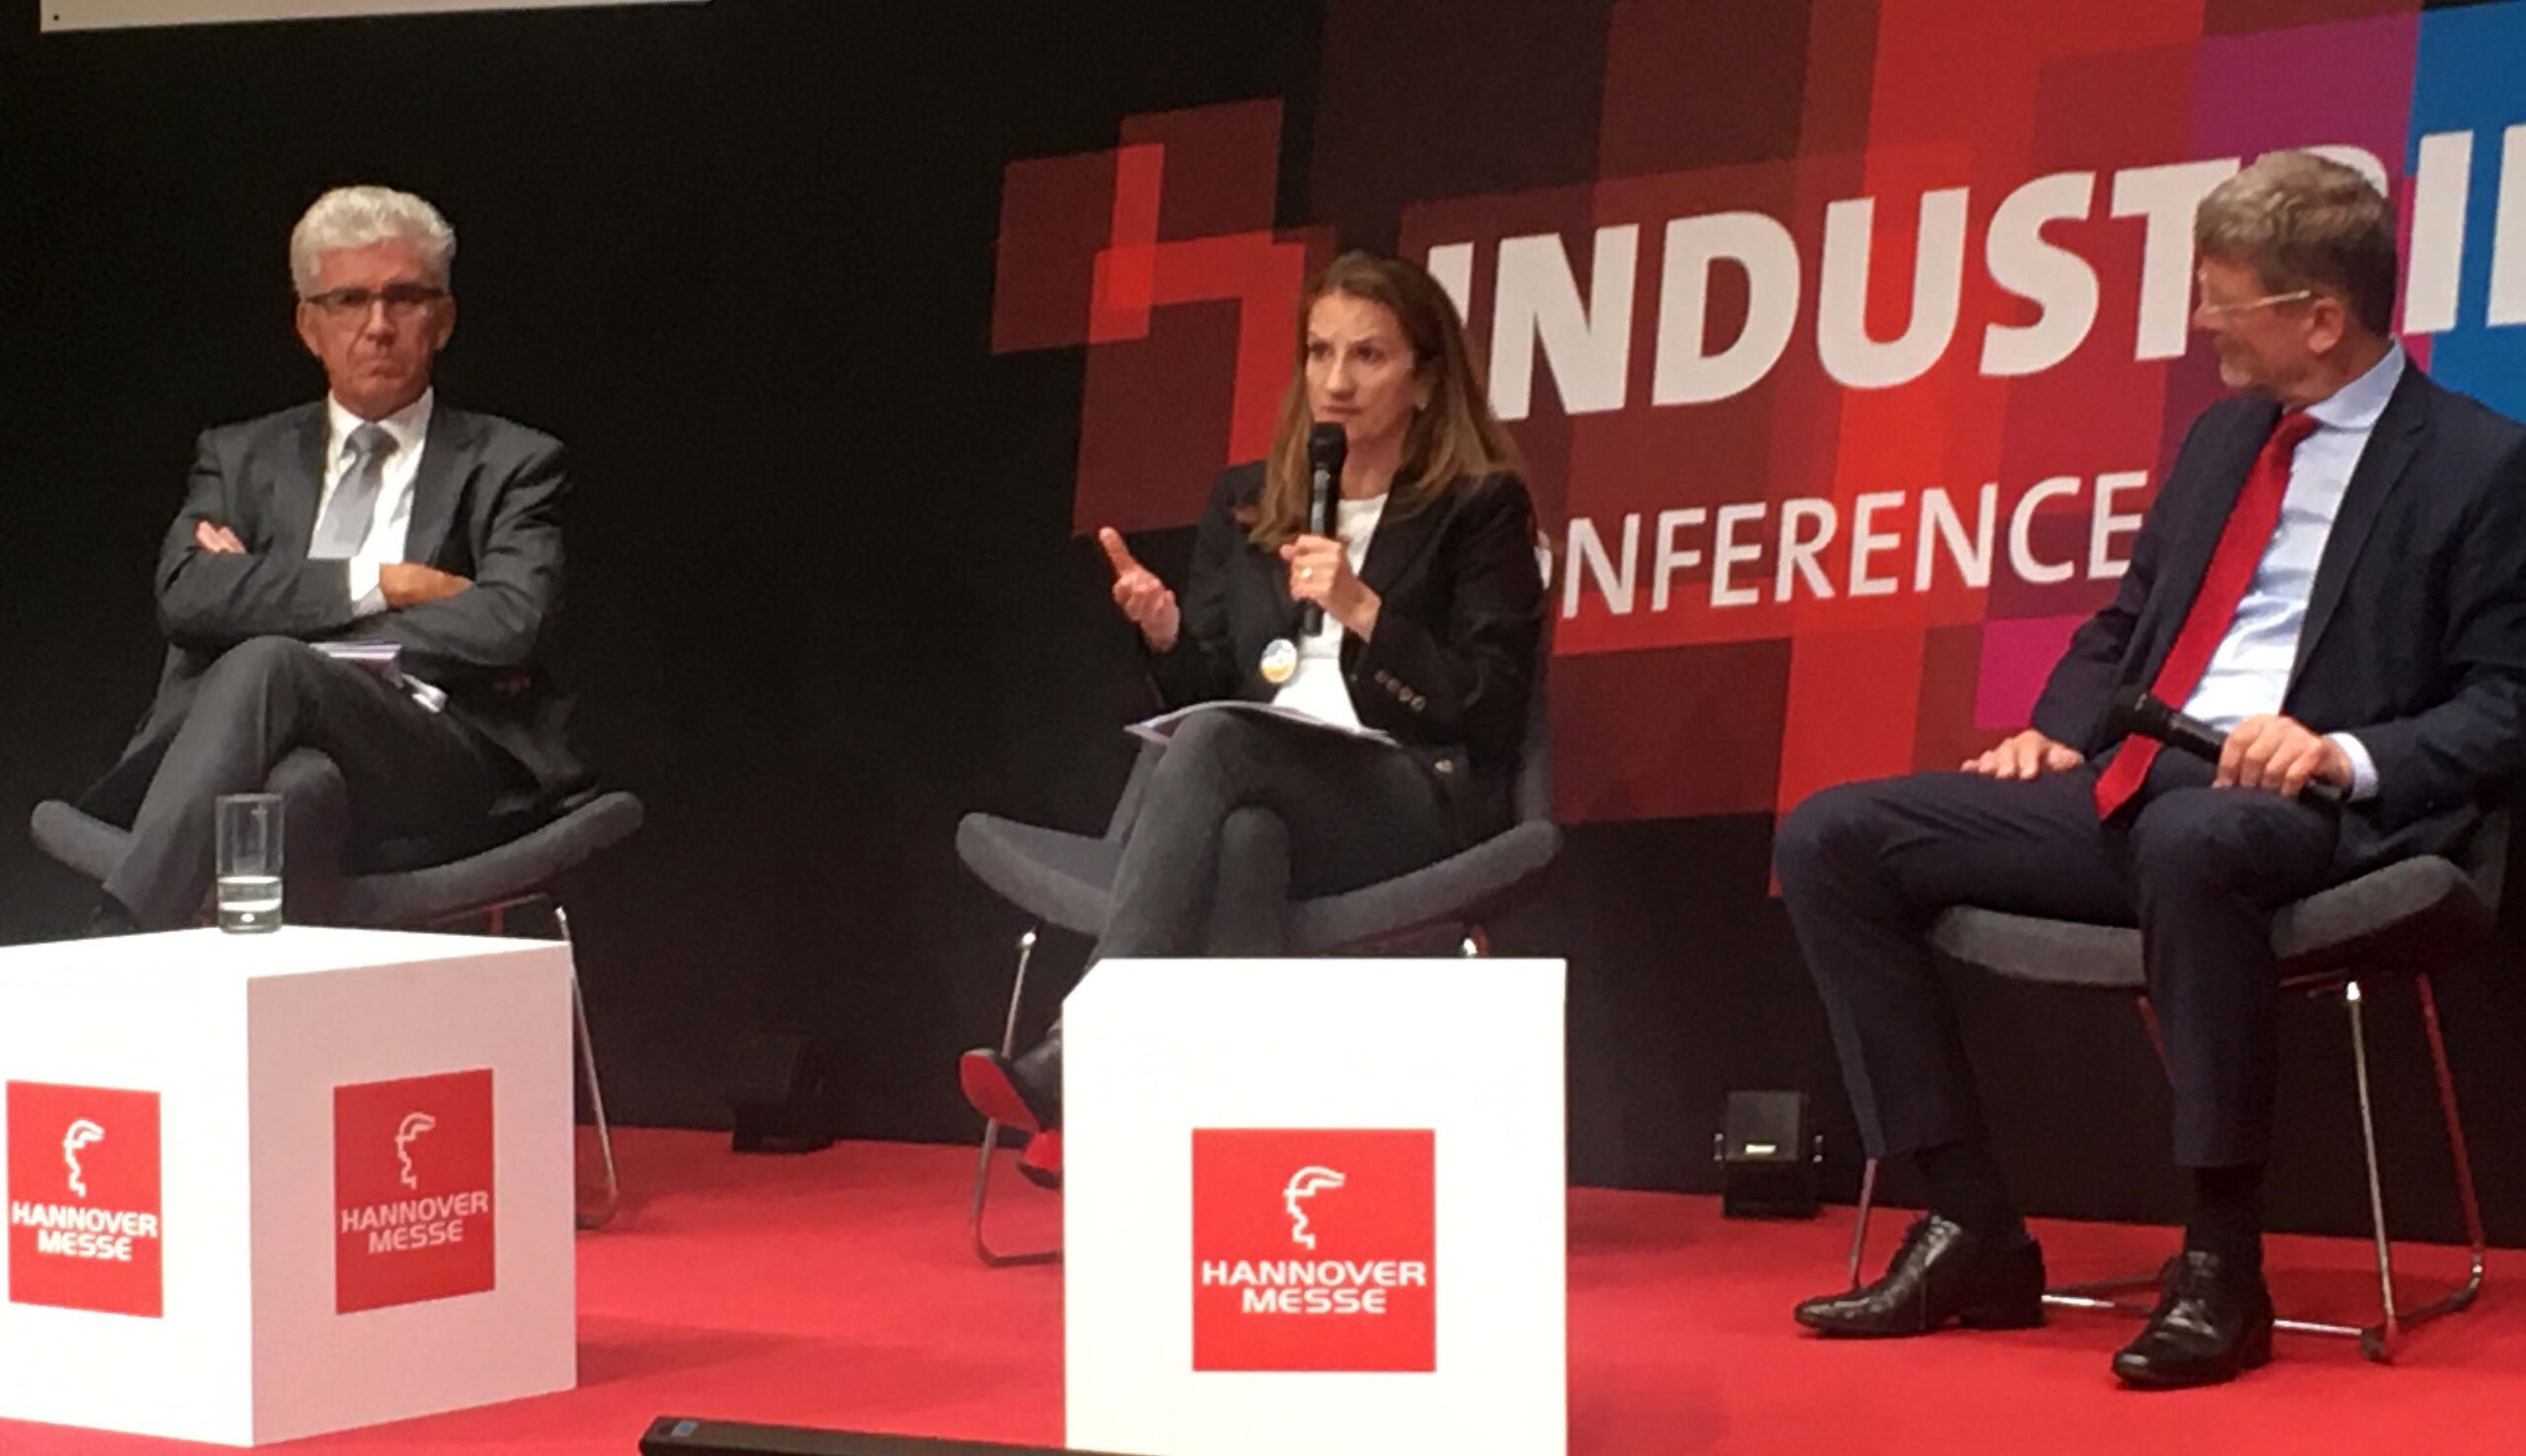 Picture of panel discussion at Hannover Messe